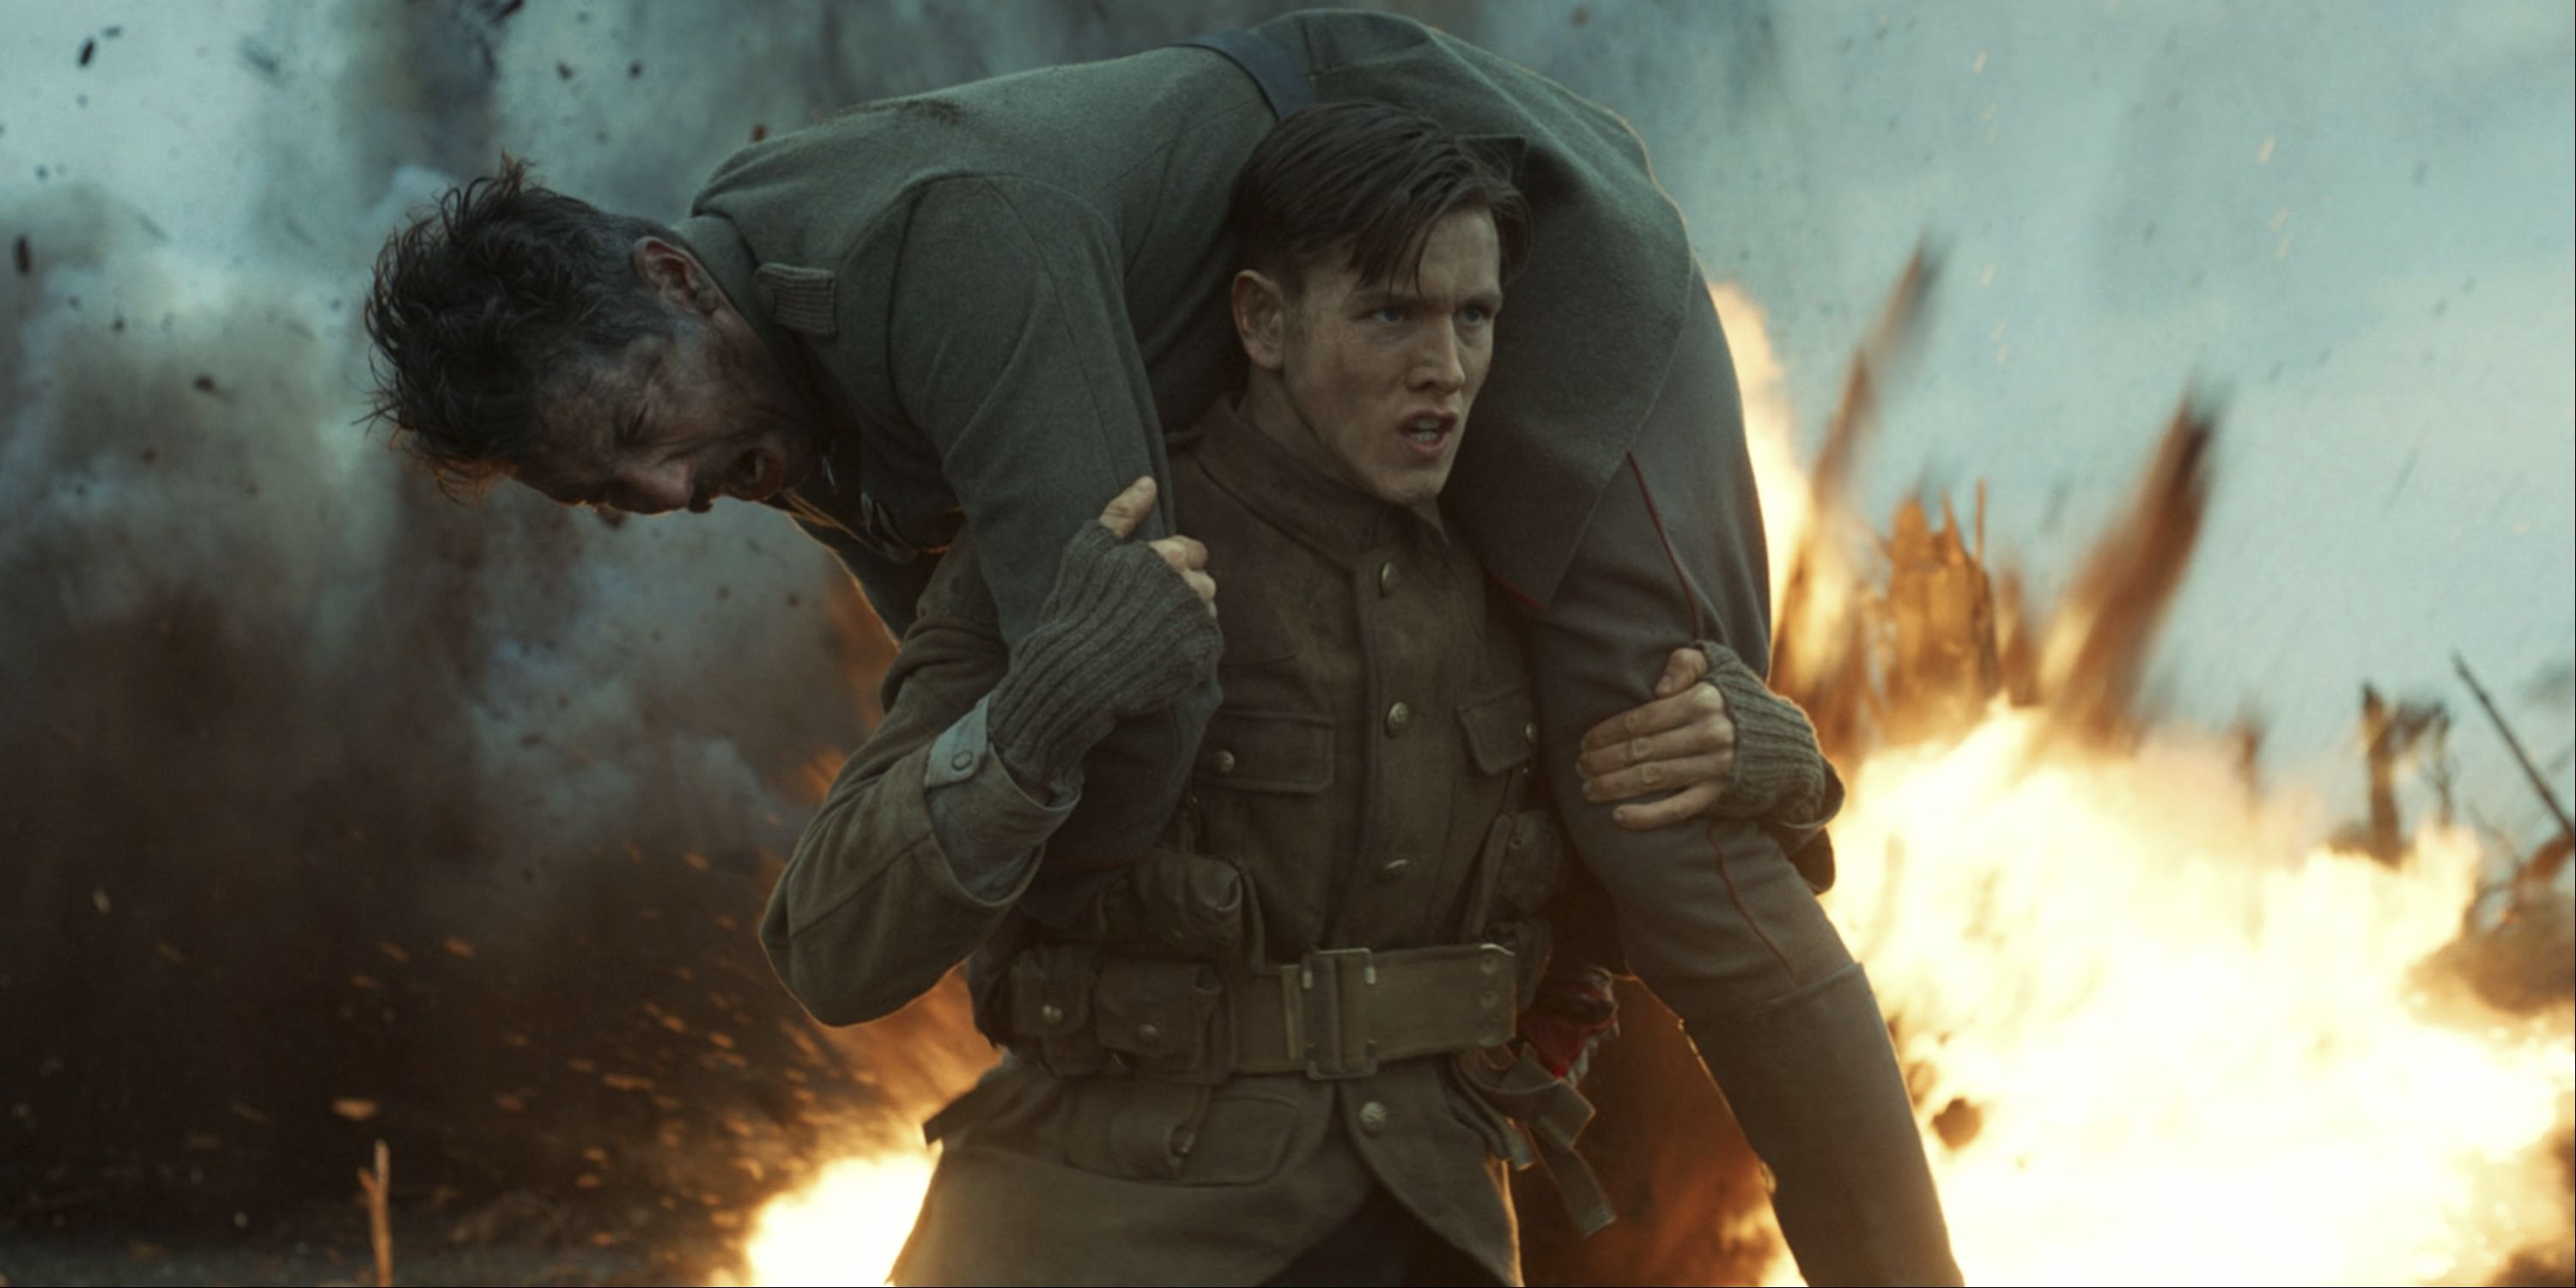 Harris Dickinson carrying soldier in The King's Man